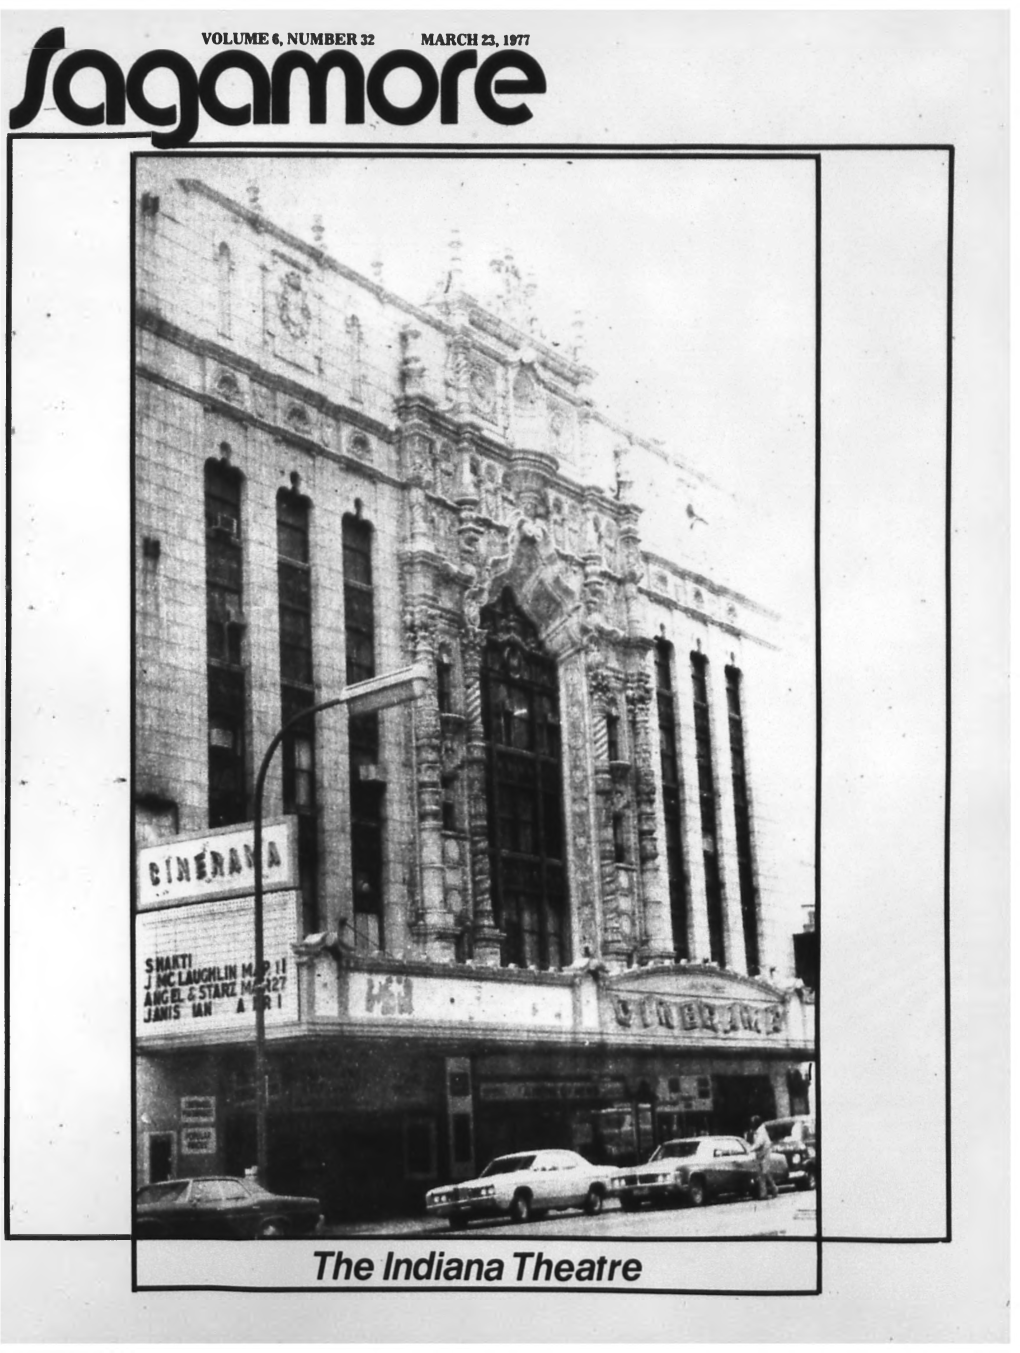 The Indiana Theatre